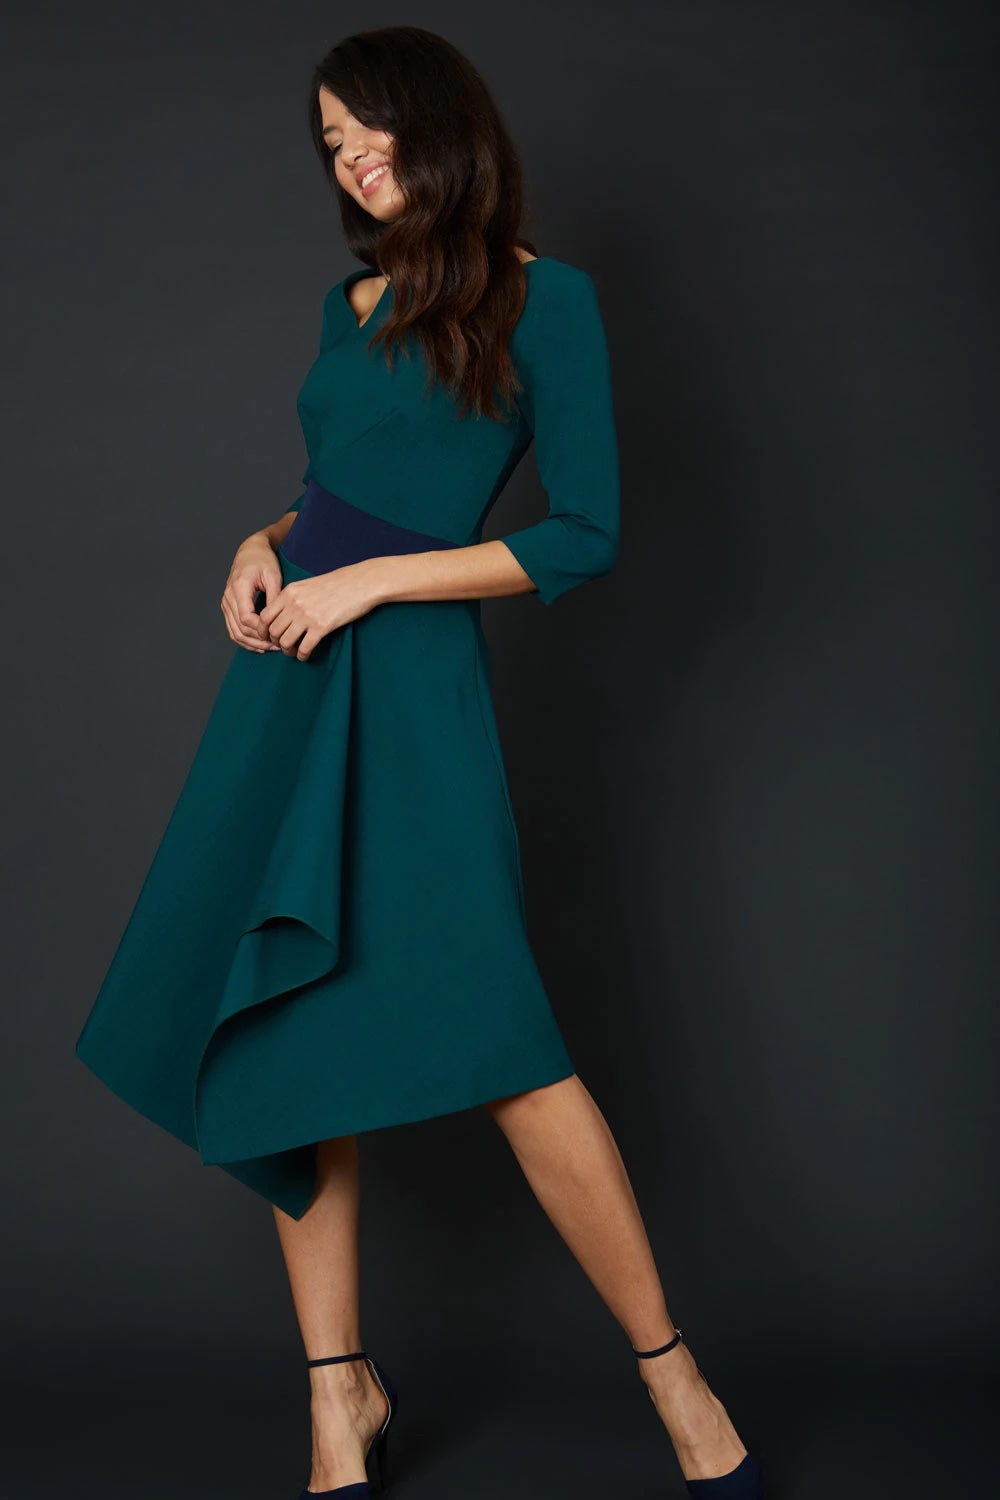 Women' Business Pinto Dress - Forest Green and Navy NORA GARDNER | OFFICIAL STORE for work and office